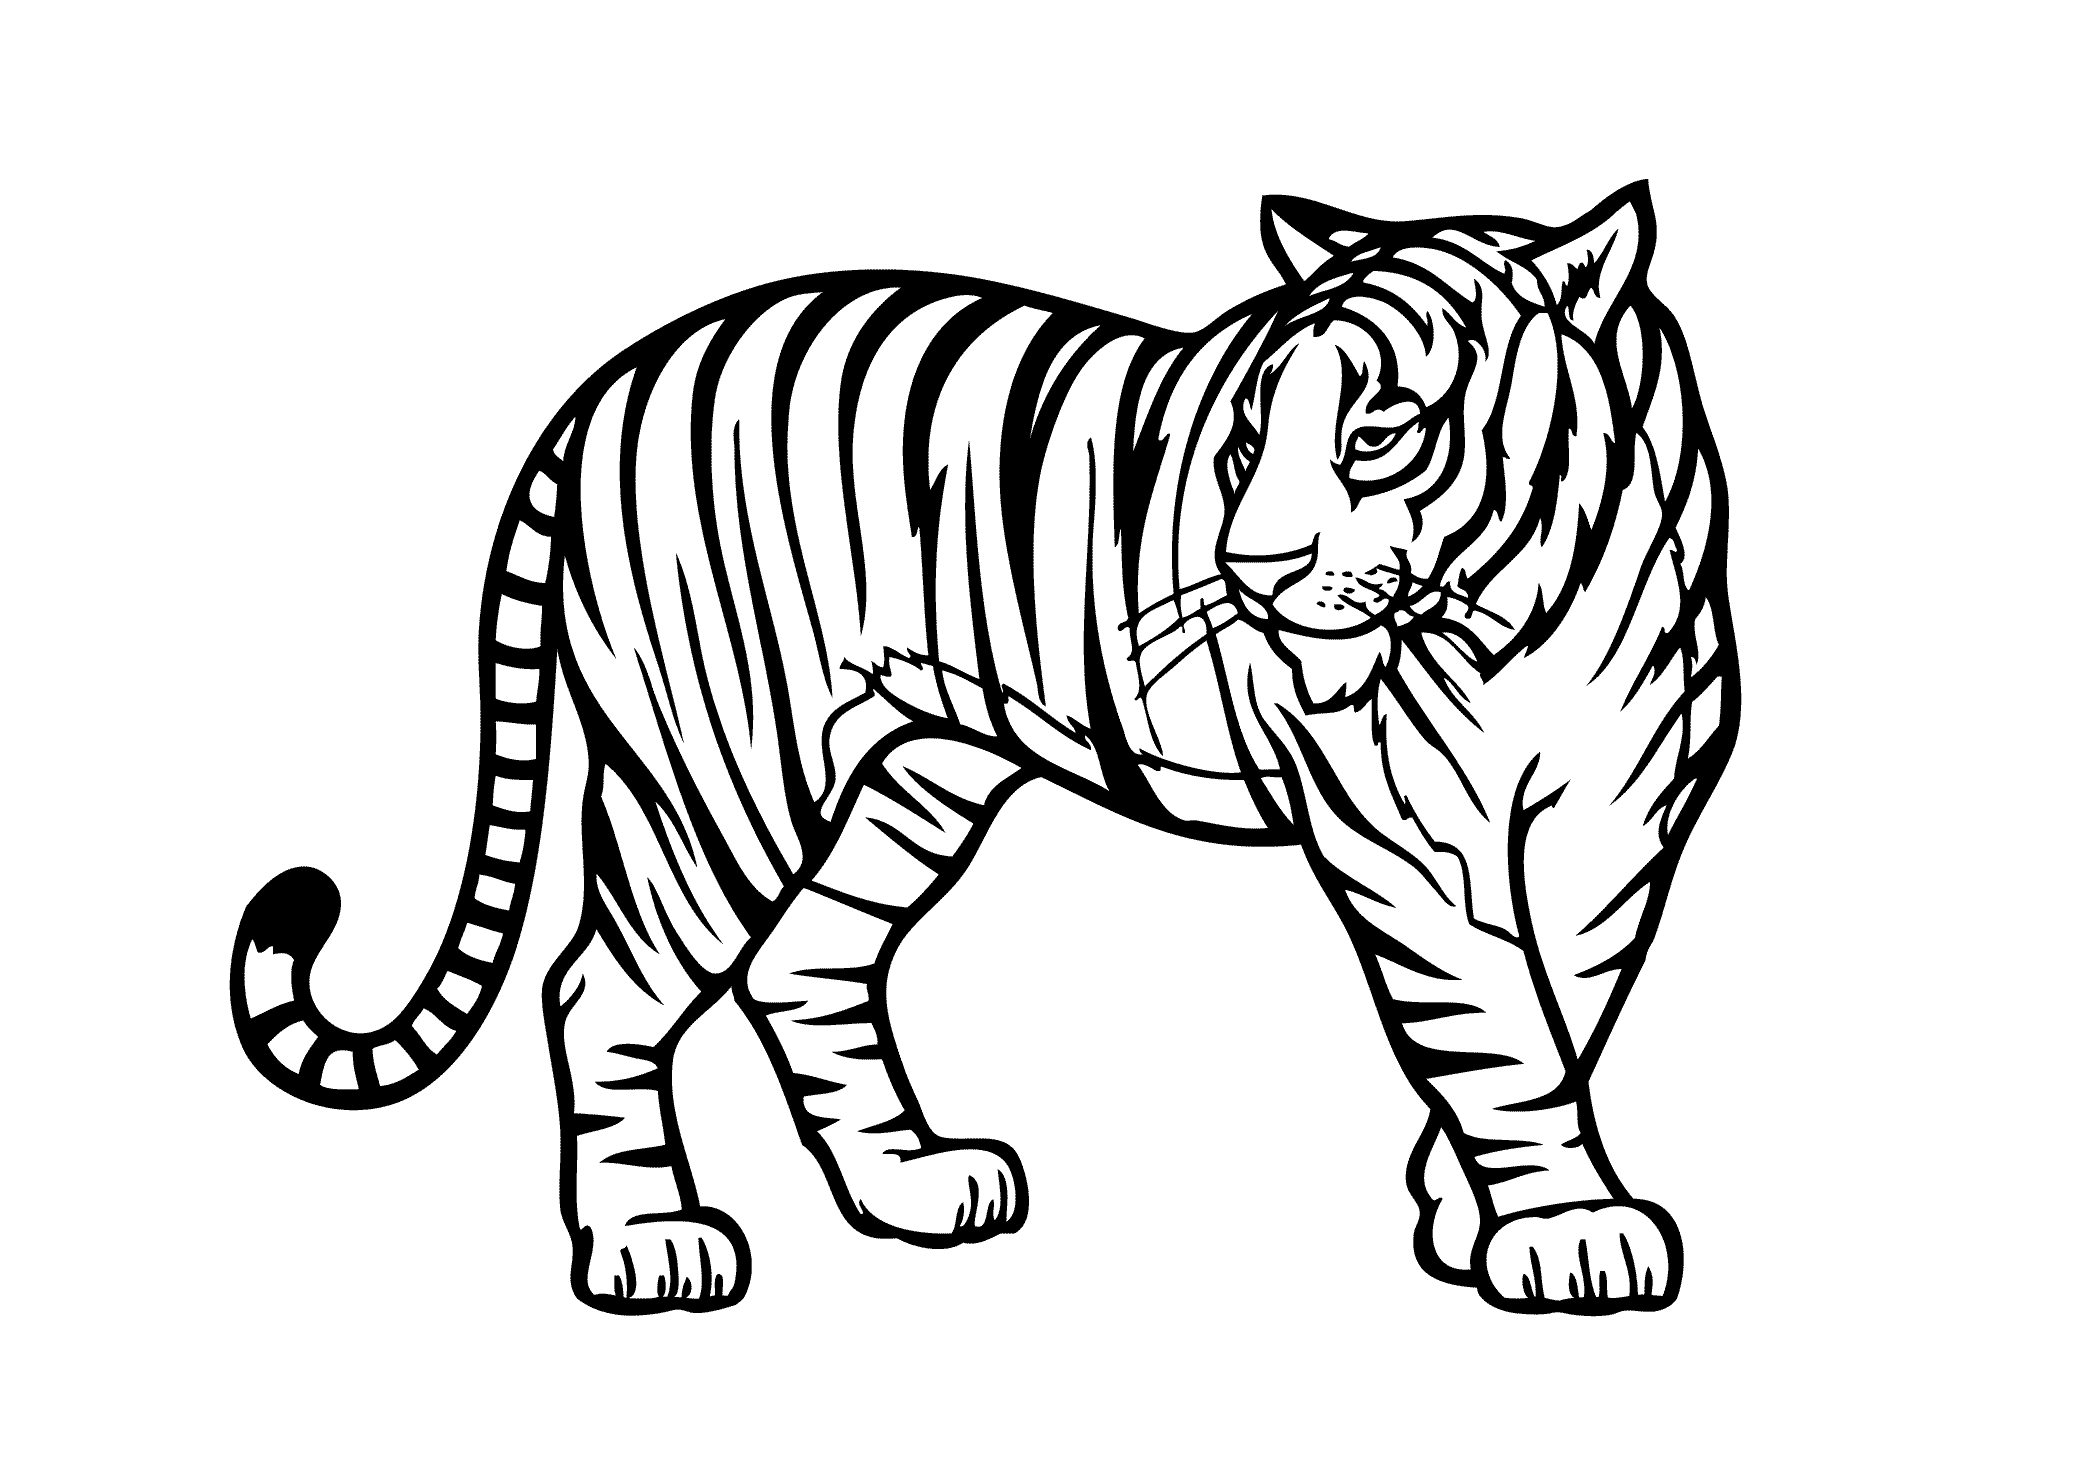 Animal Coloring Pages Tiger - Coloring Pages For All Ages